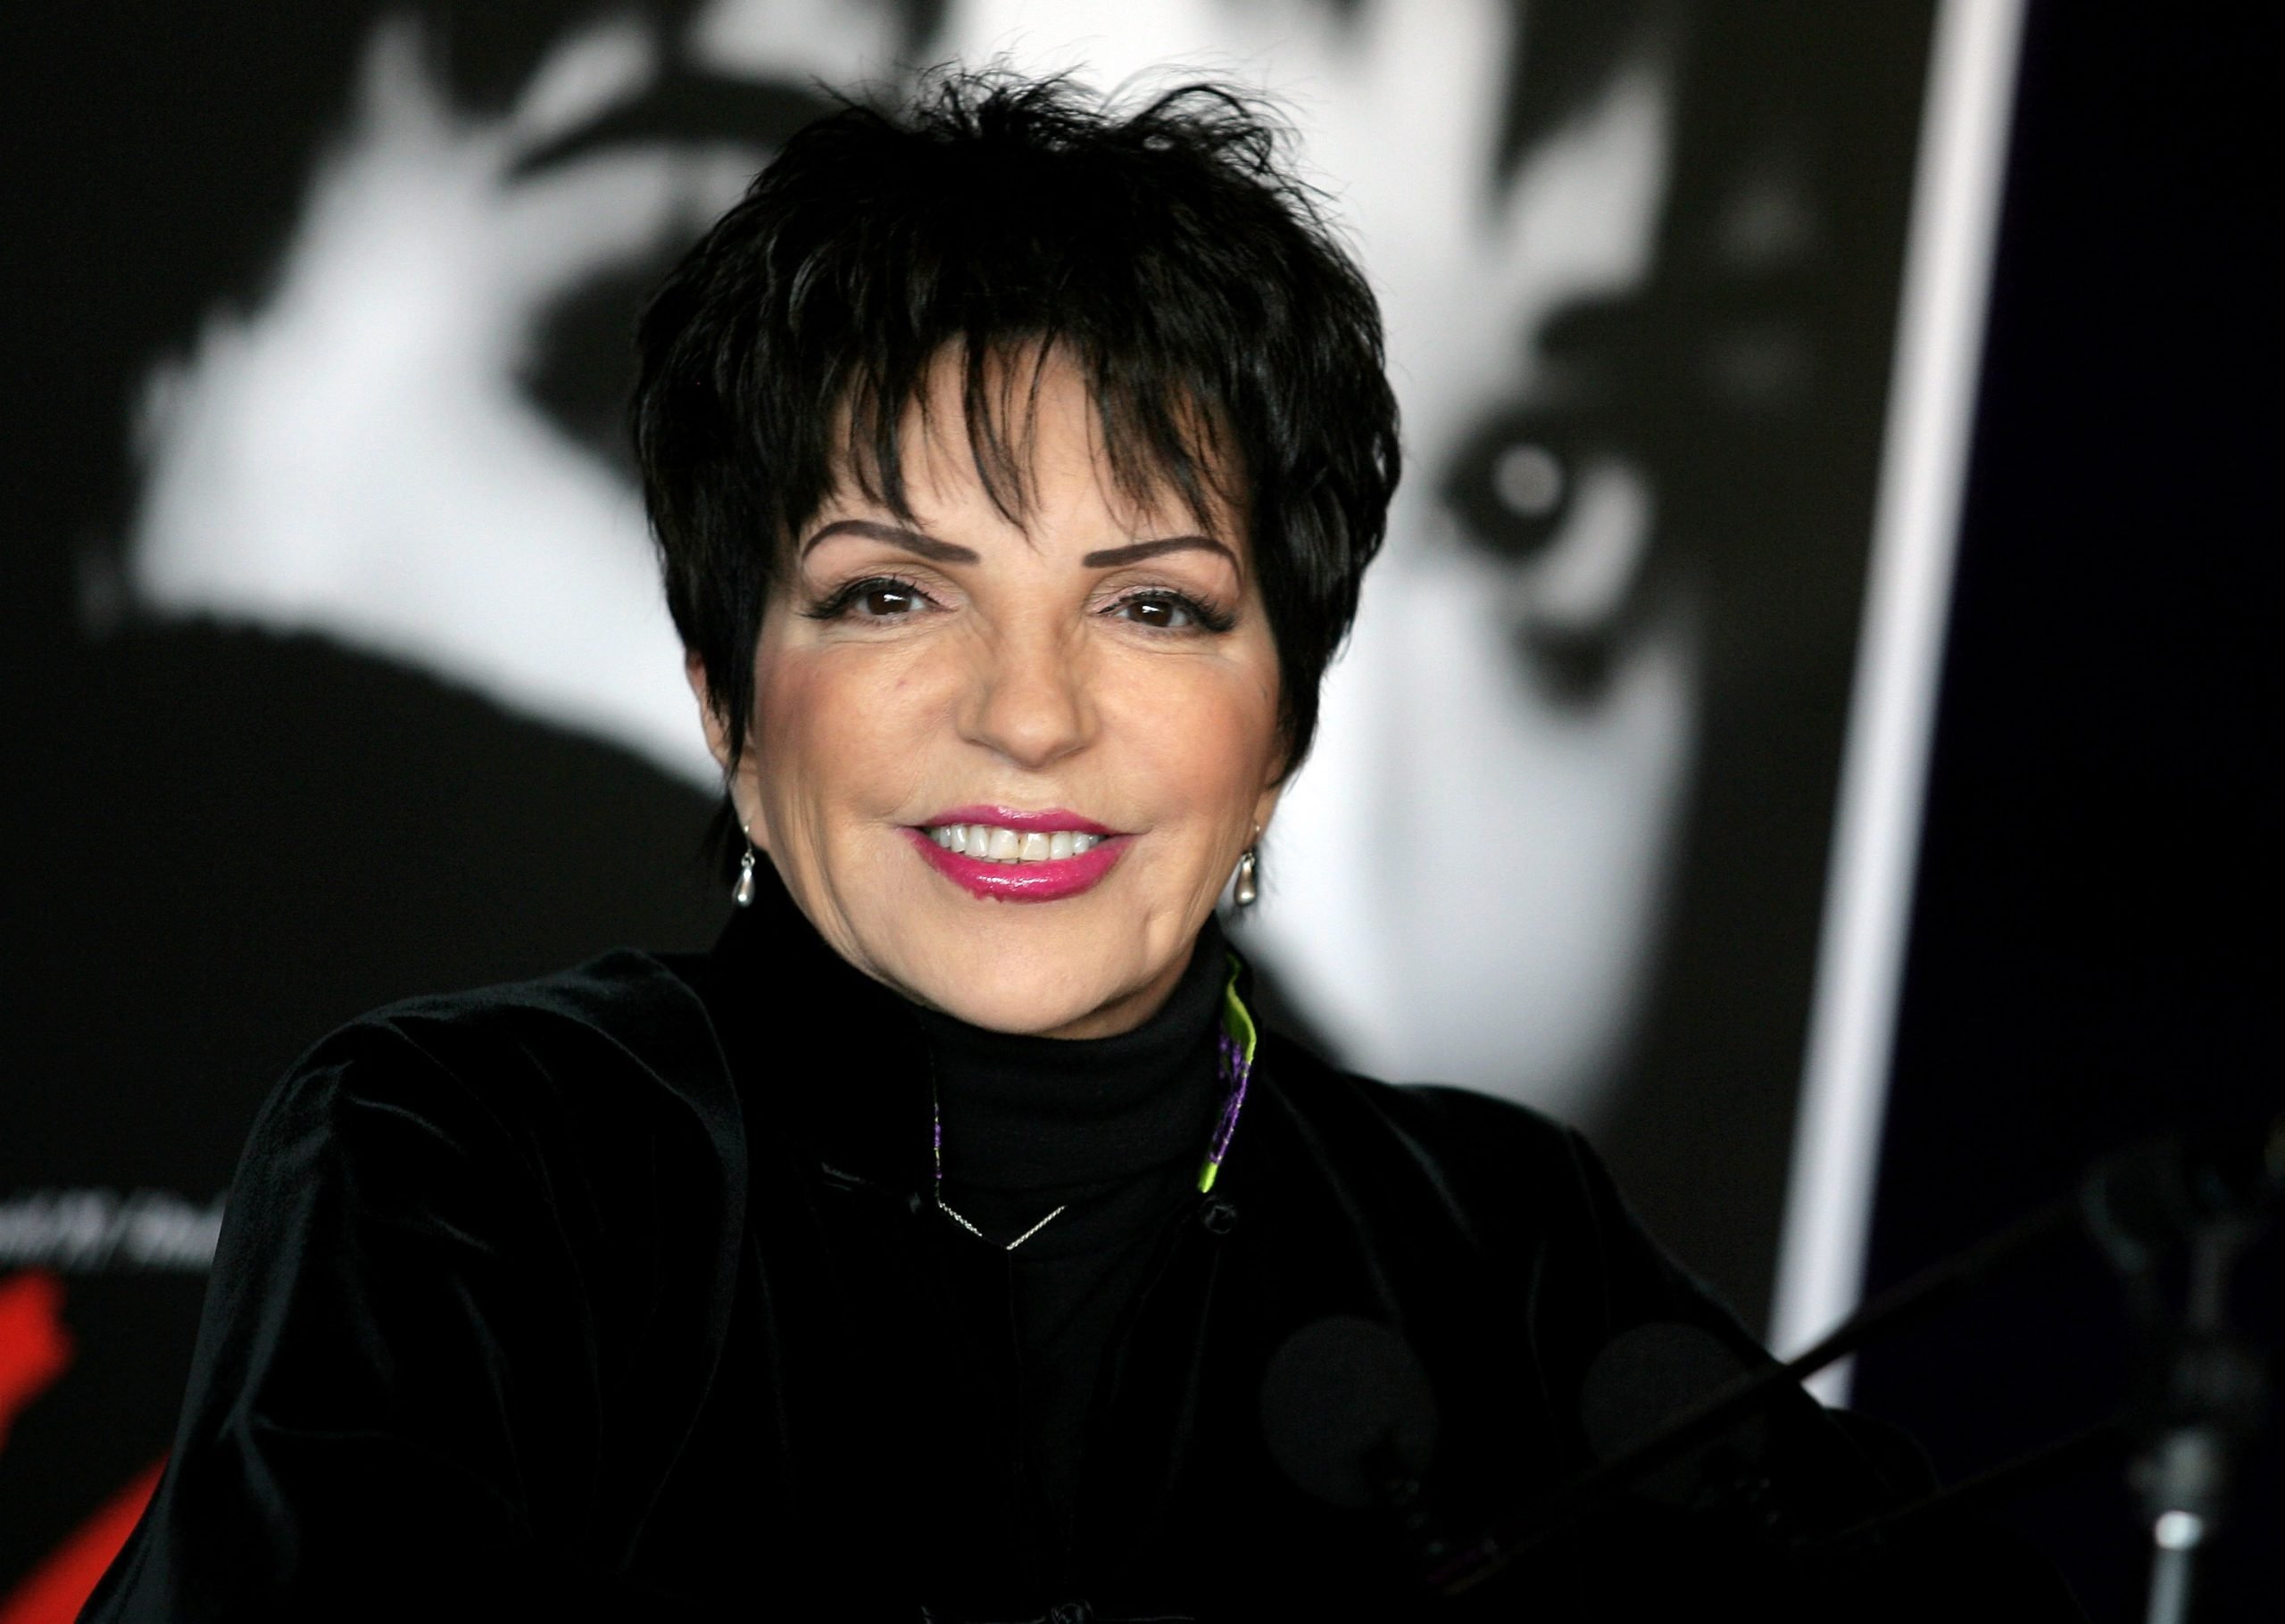 Judy Garland or Liza Minnelli: Who Is Worth More?